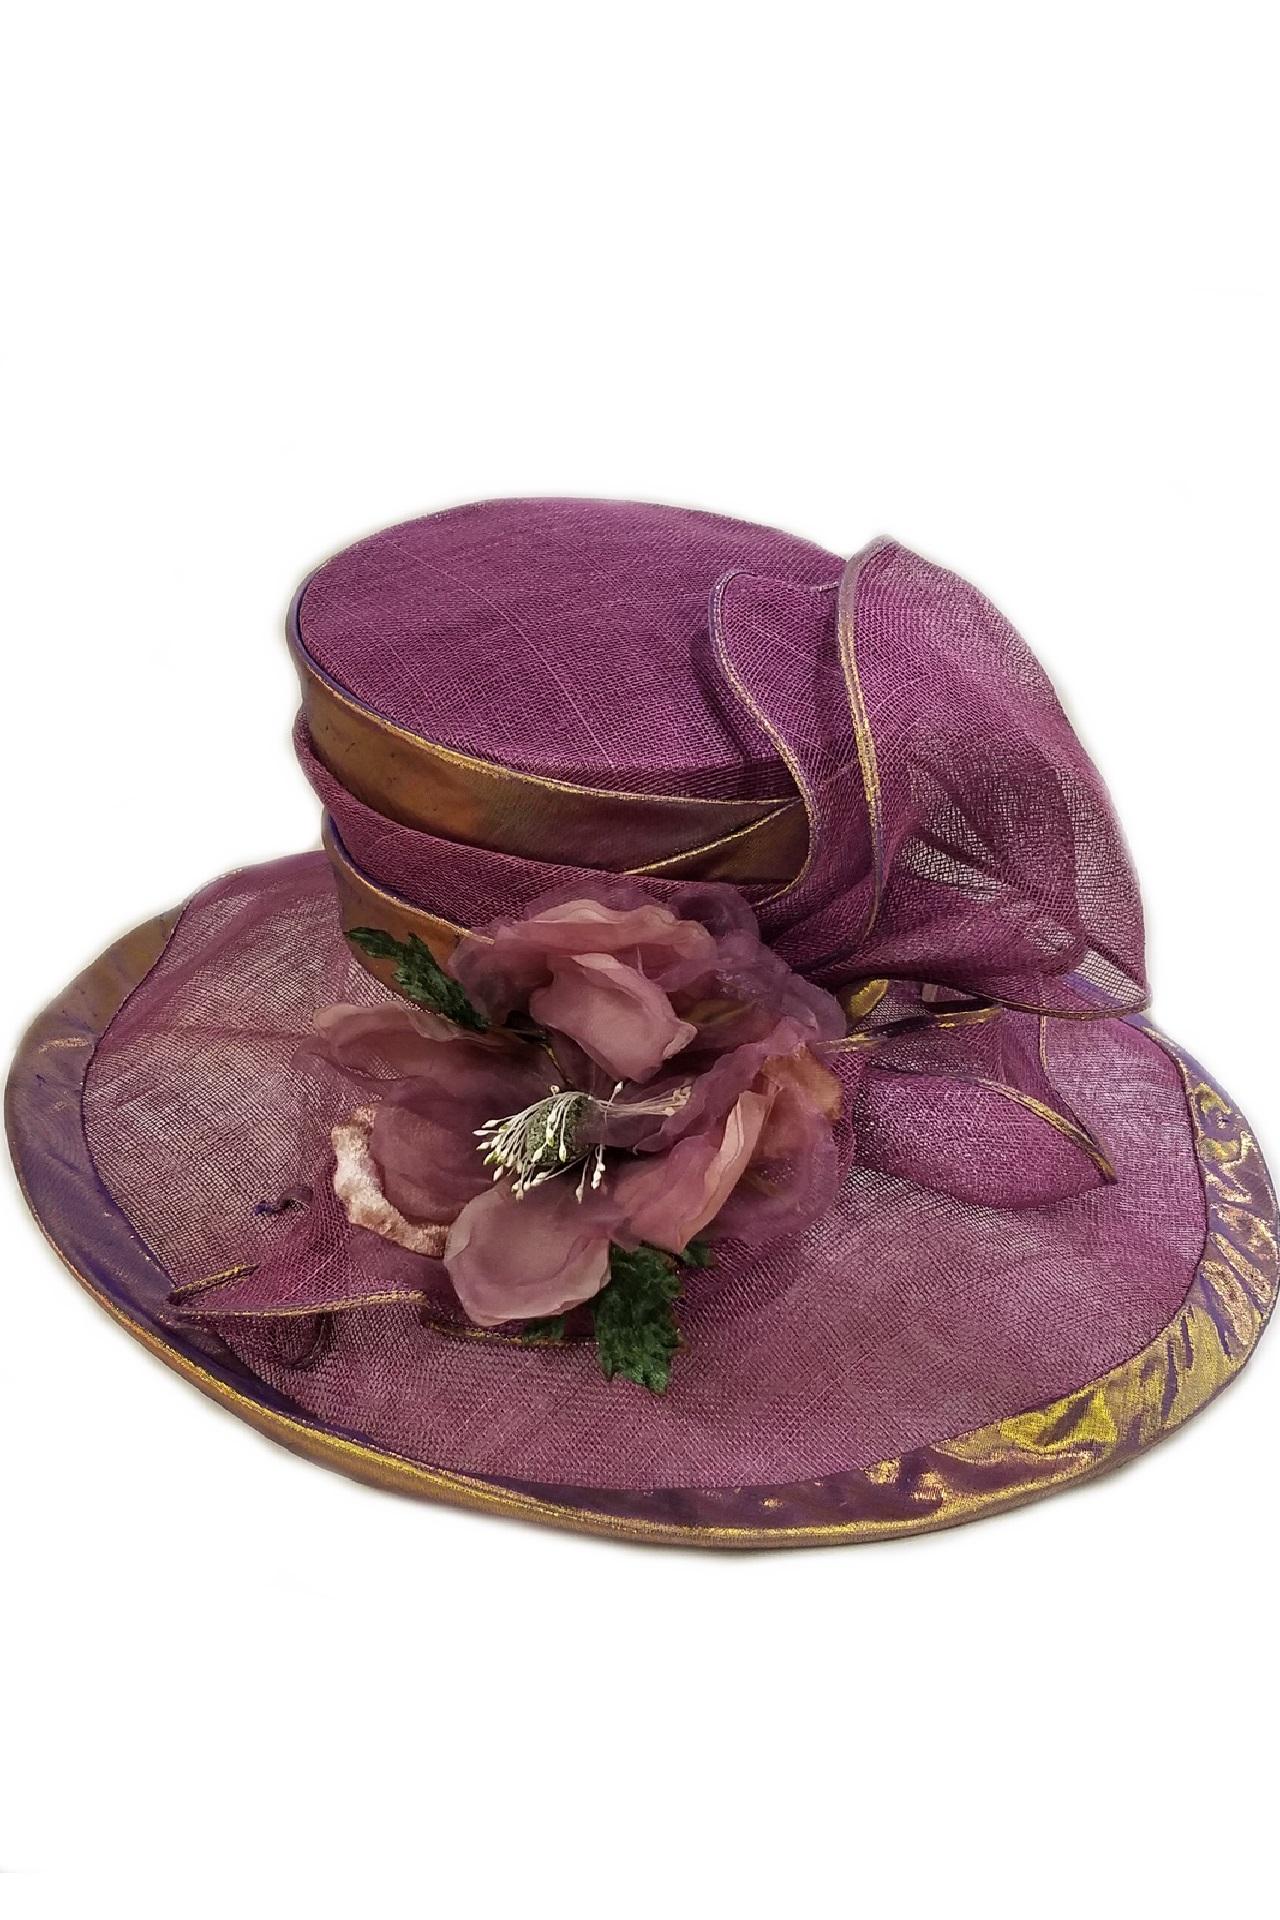 Horse Country Carrot - HCS M10005 Purple-Gold Hat